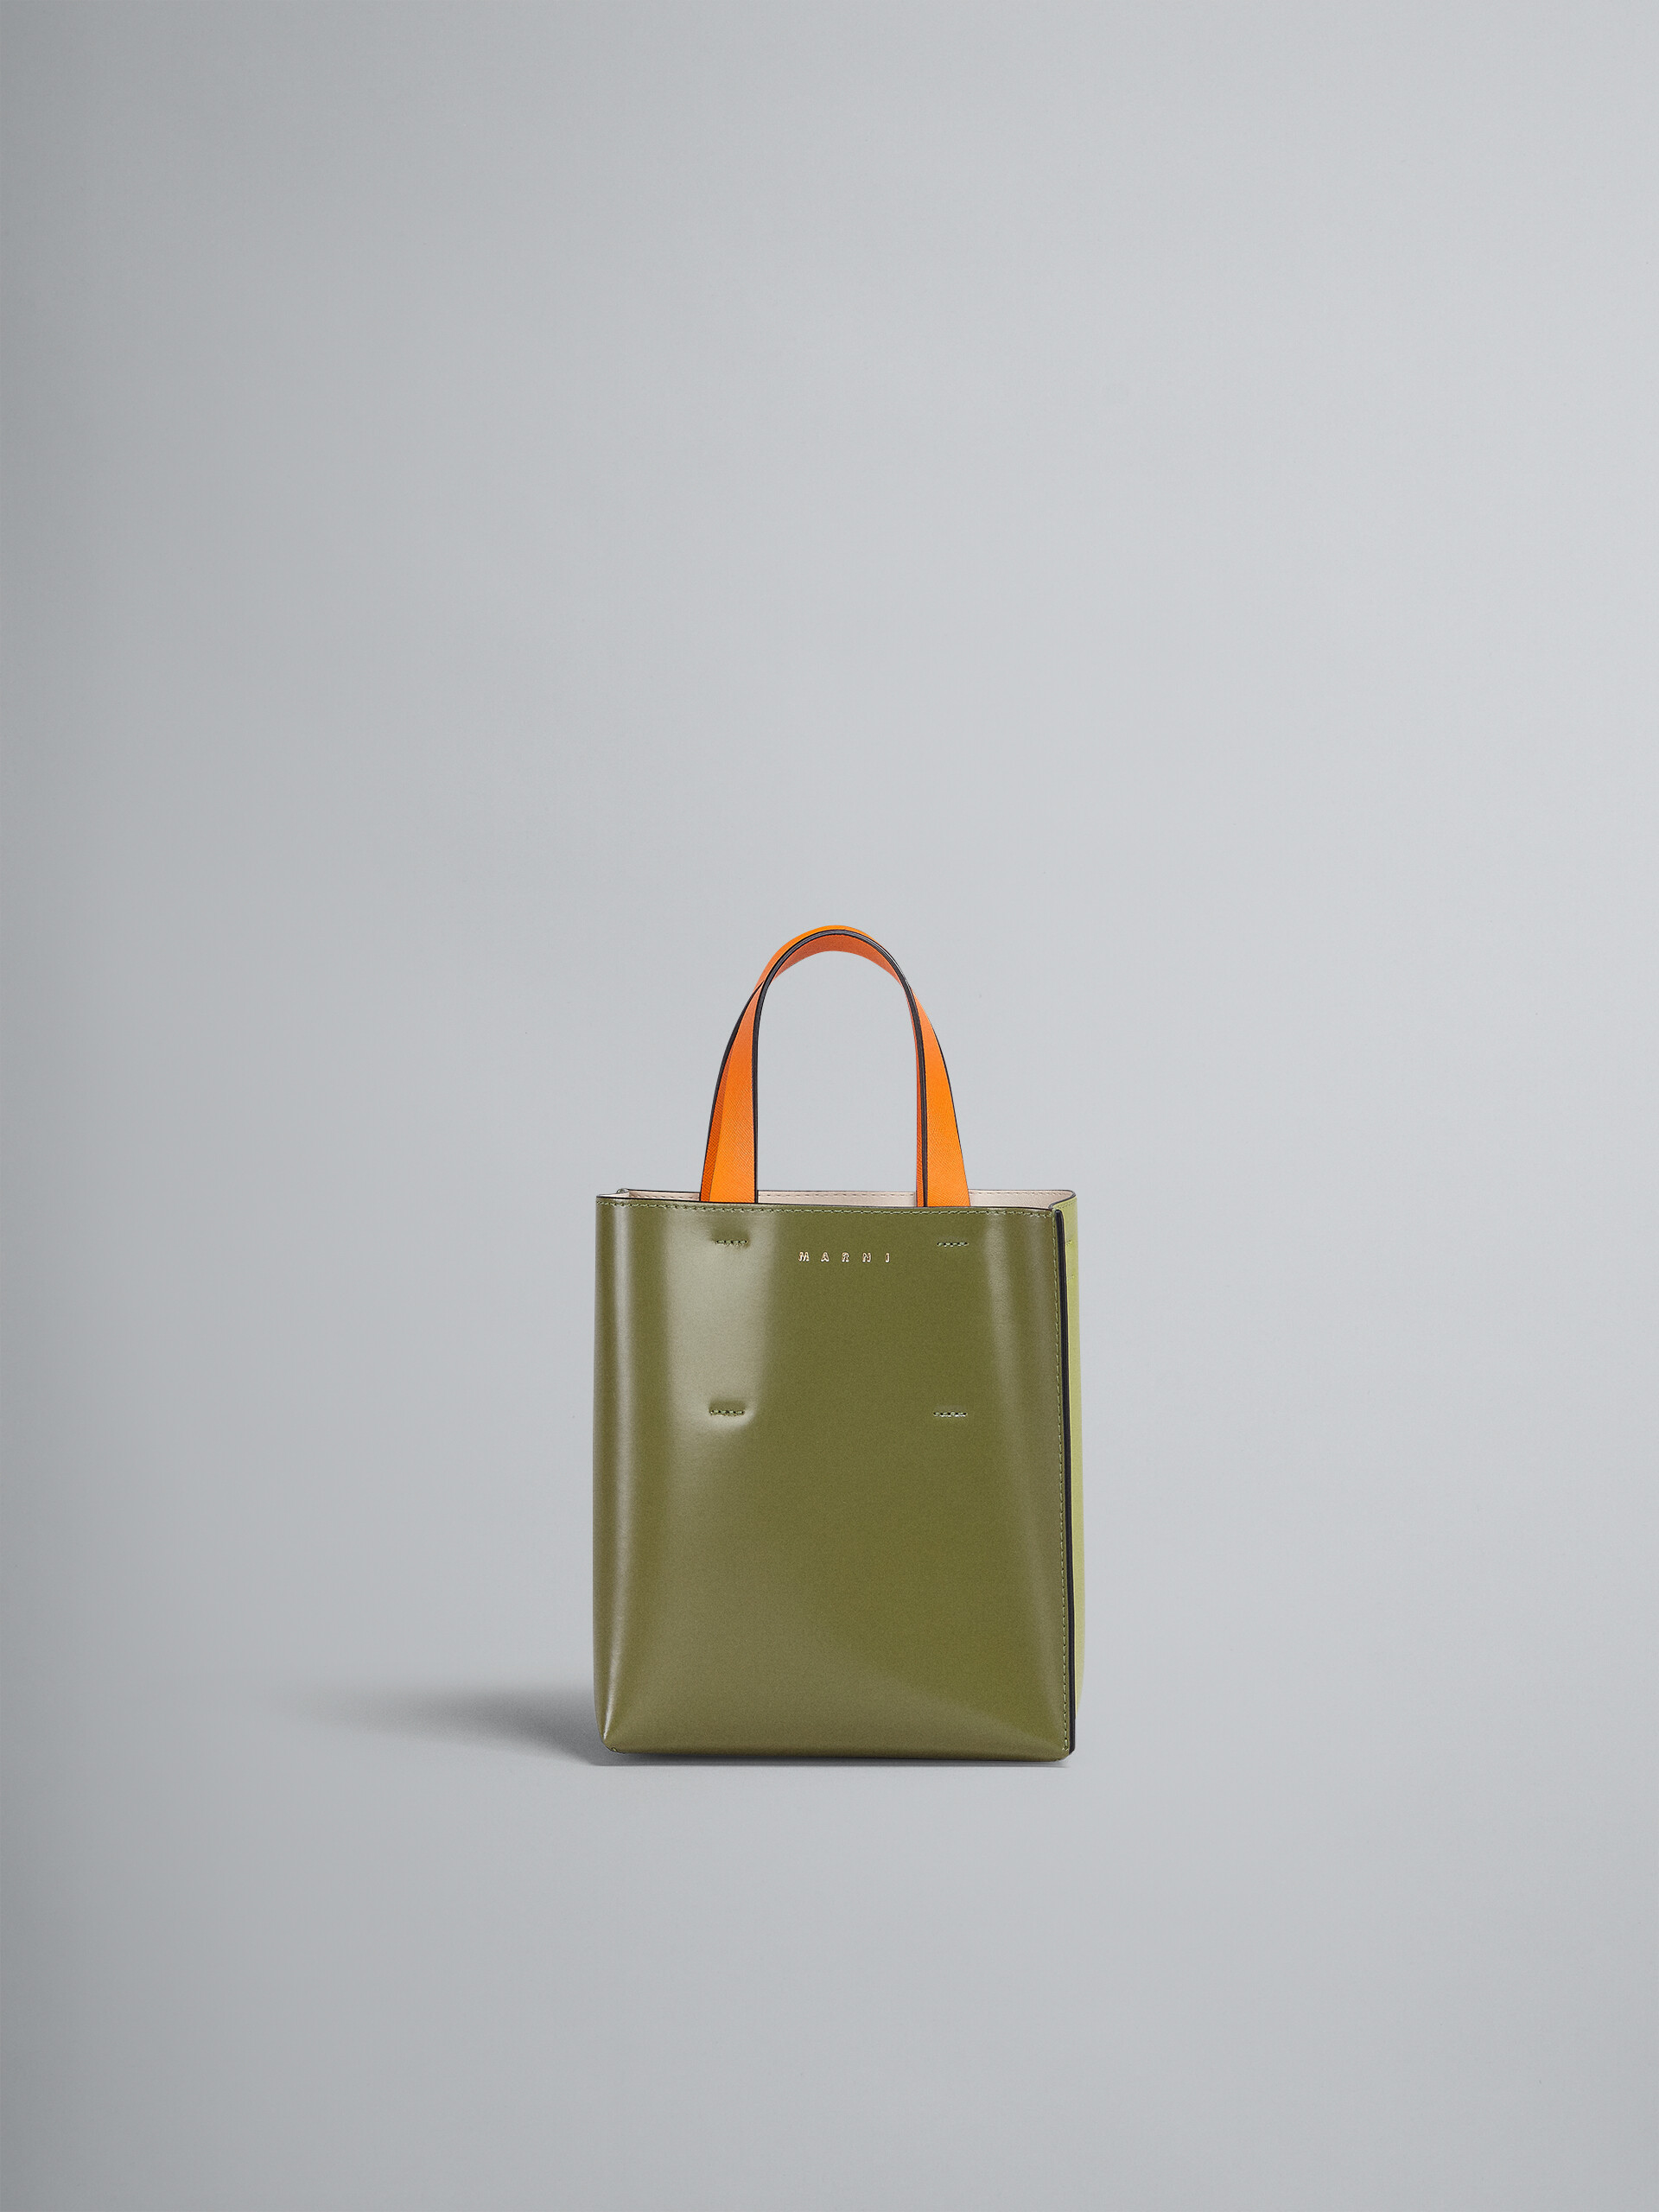 MUSEO mini bag in green leather - Shopping Bags - Image 1